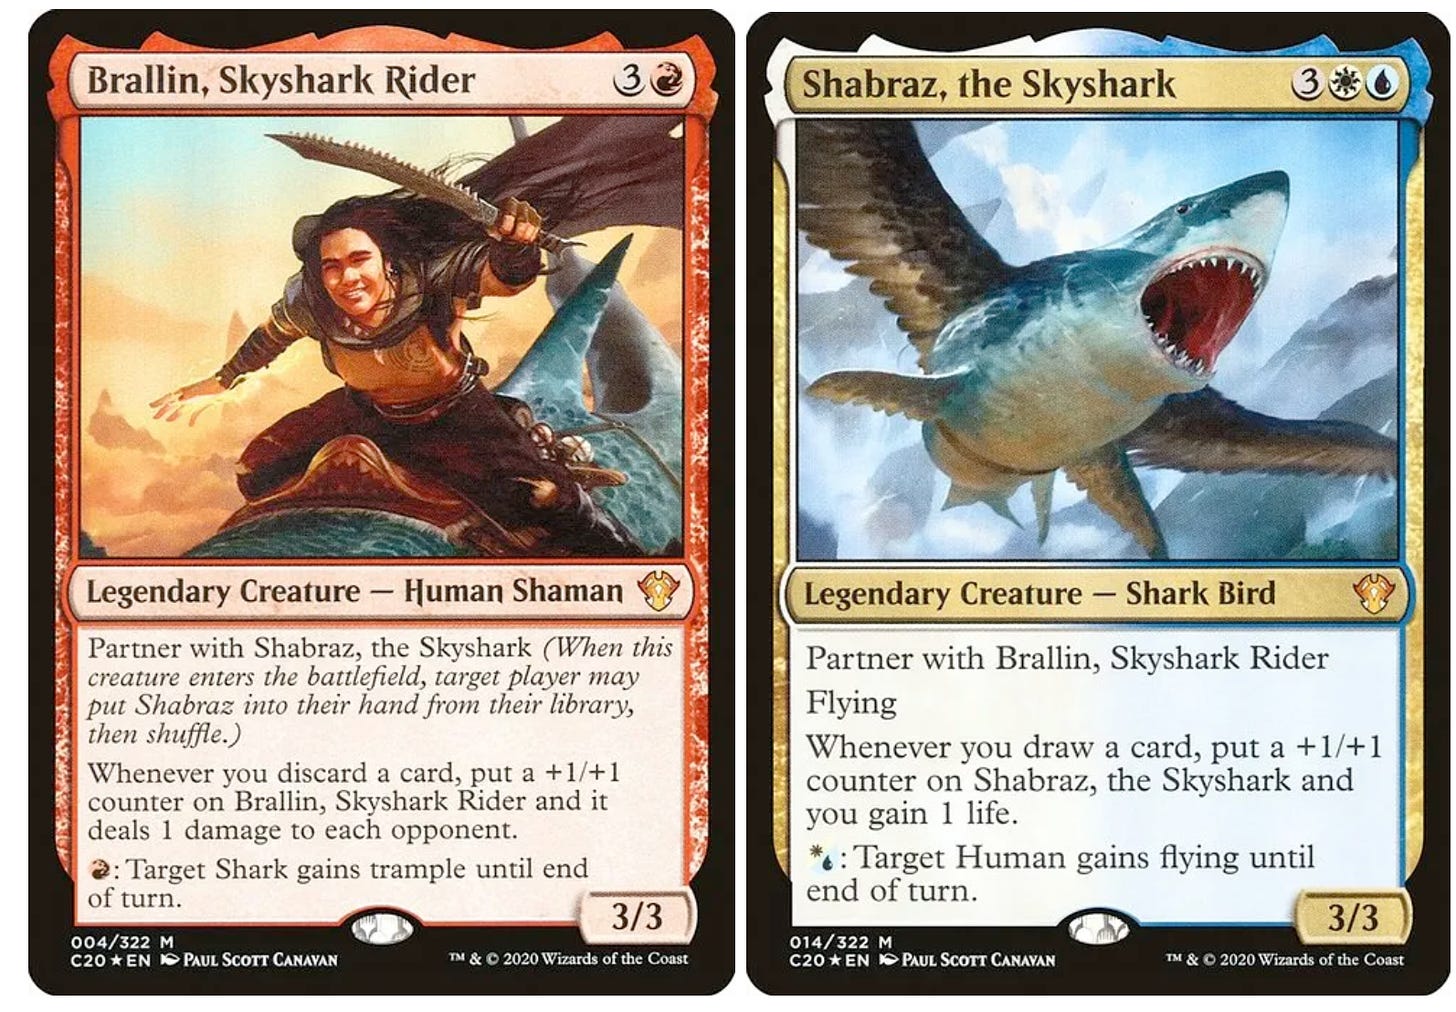 Two cards, one titled Brallin, Skyshark Rider features a man on a flying shark. Below are detail of its value in the game. The second card features a shark bird and details of its value below